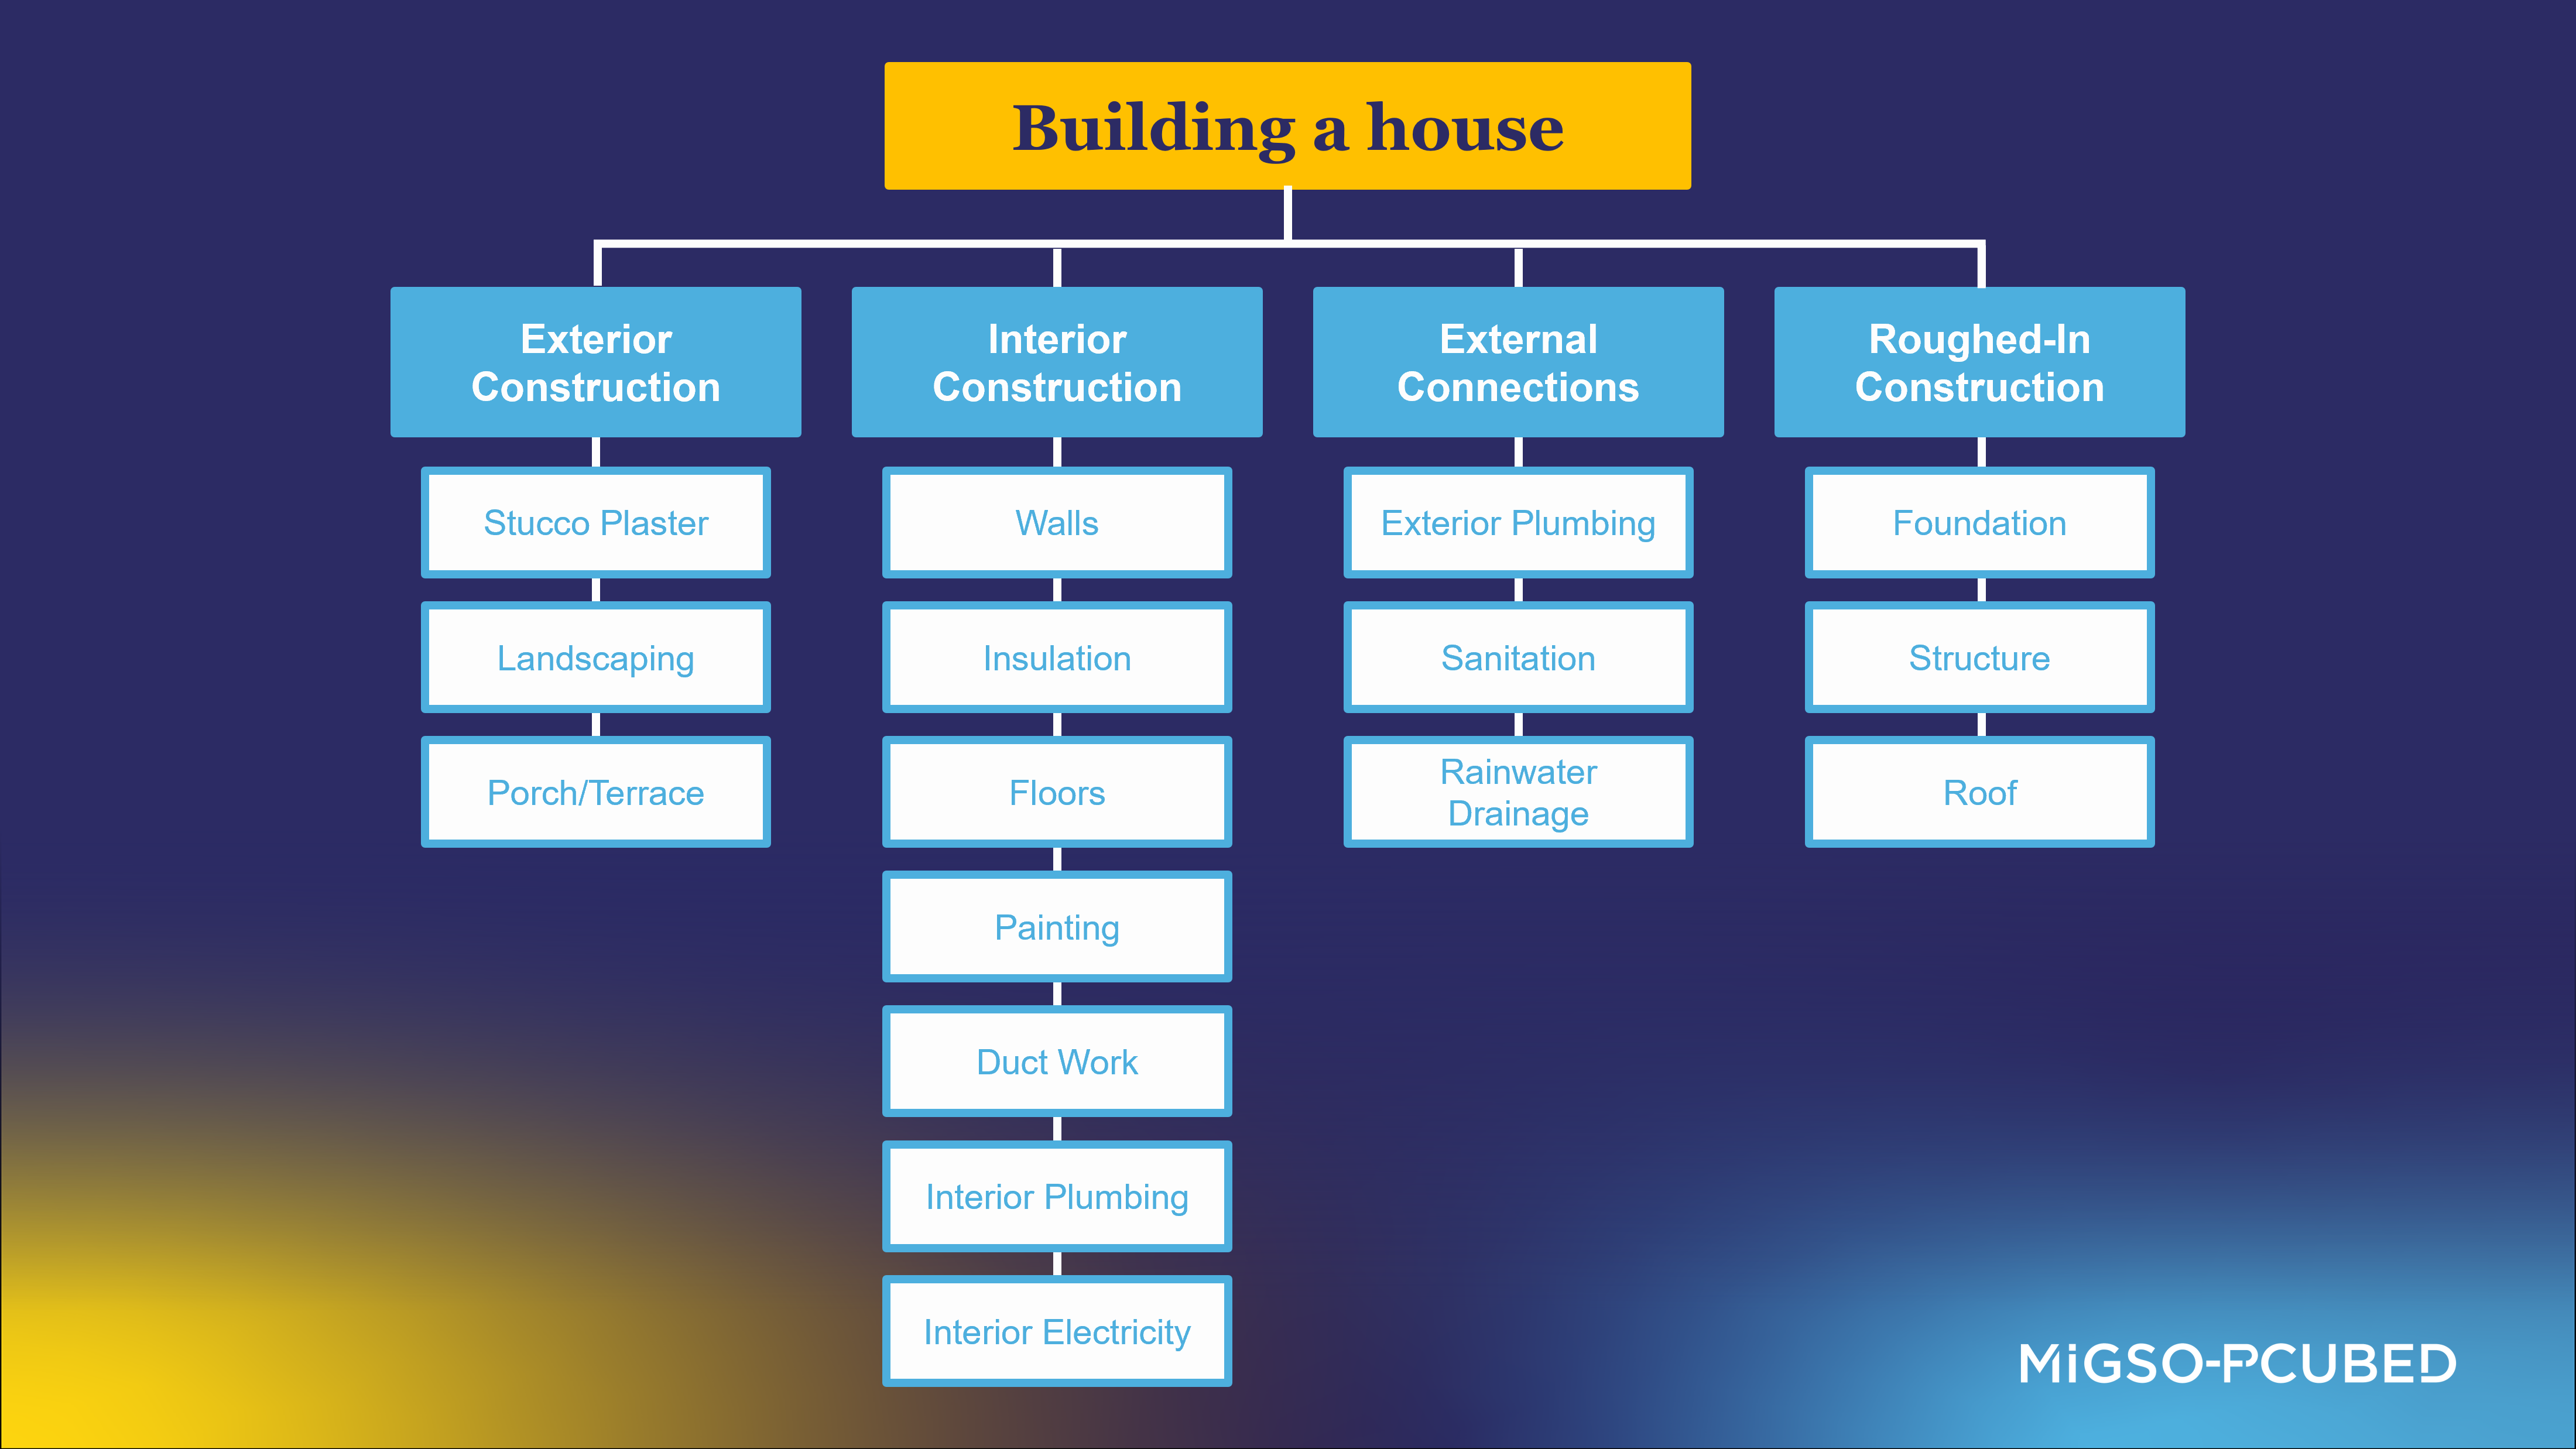 Work Breakdown Structure (WBS) of a construction project to build a house